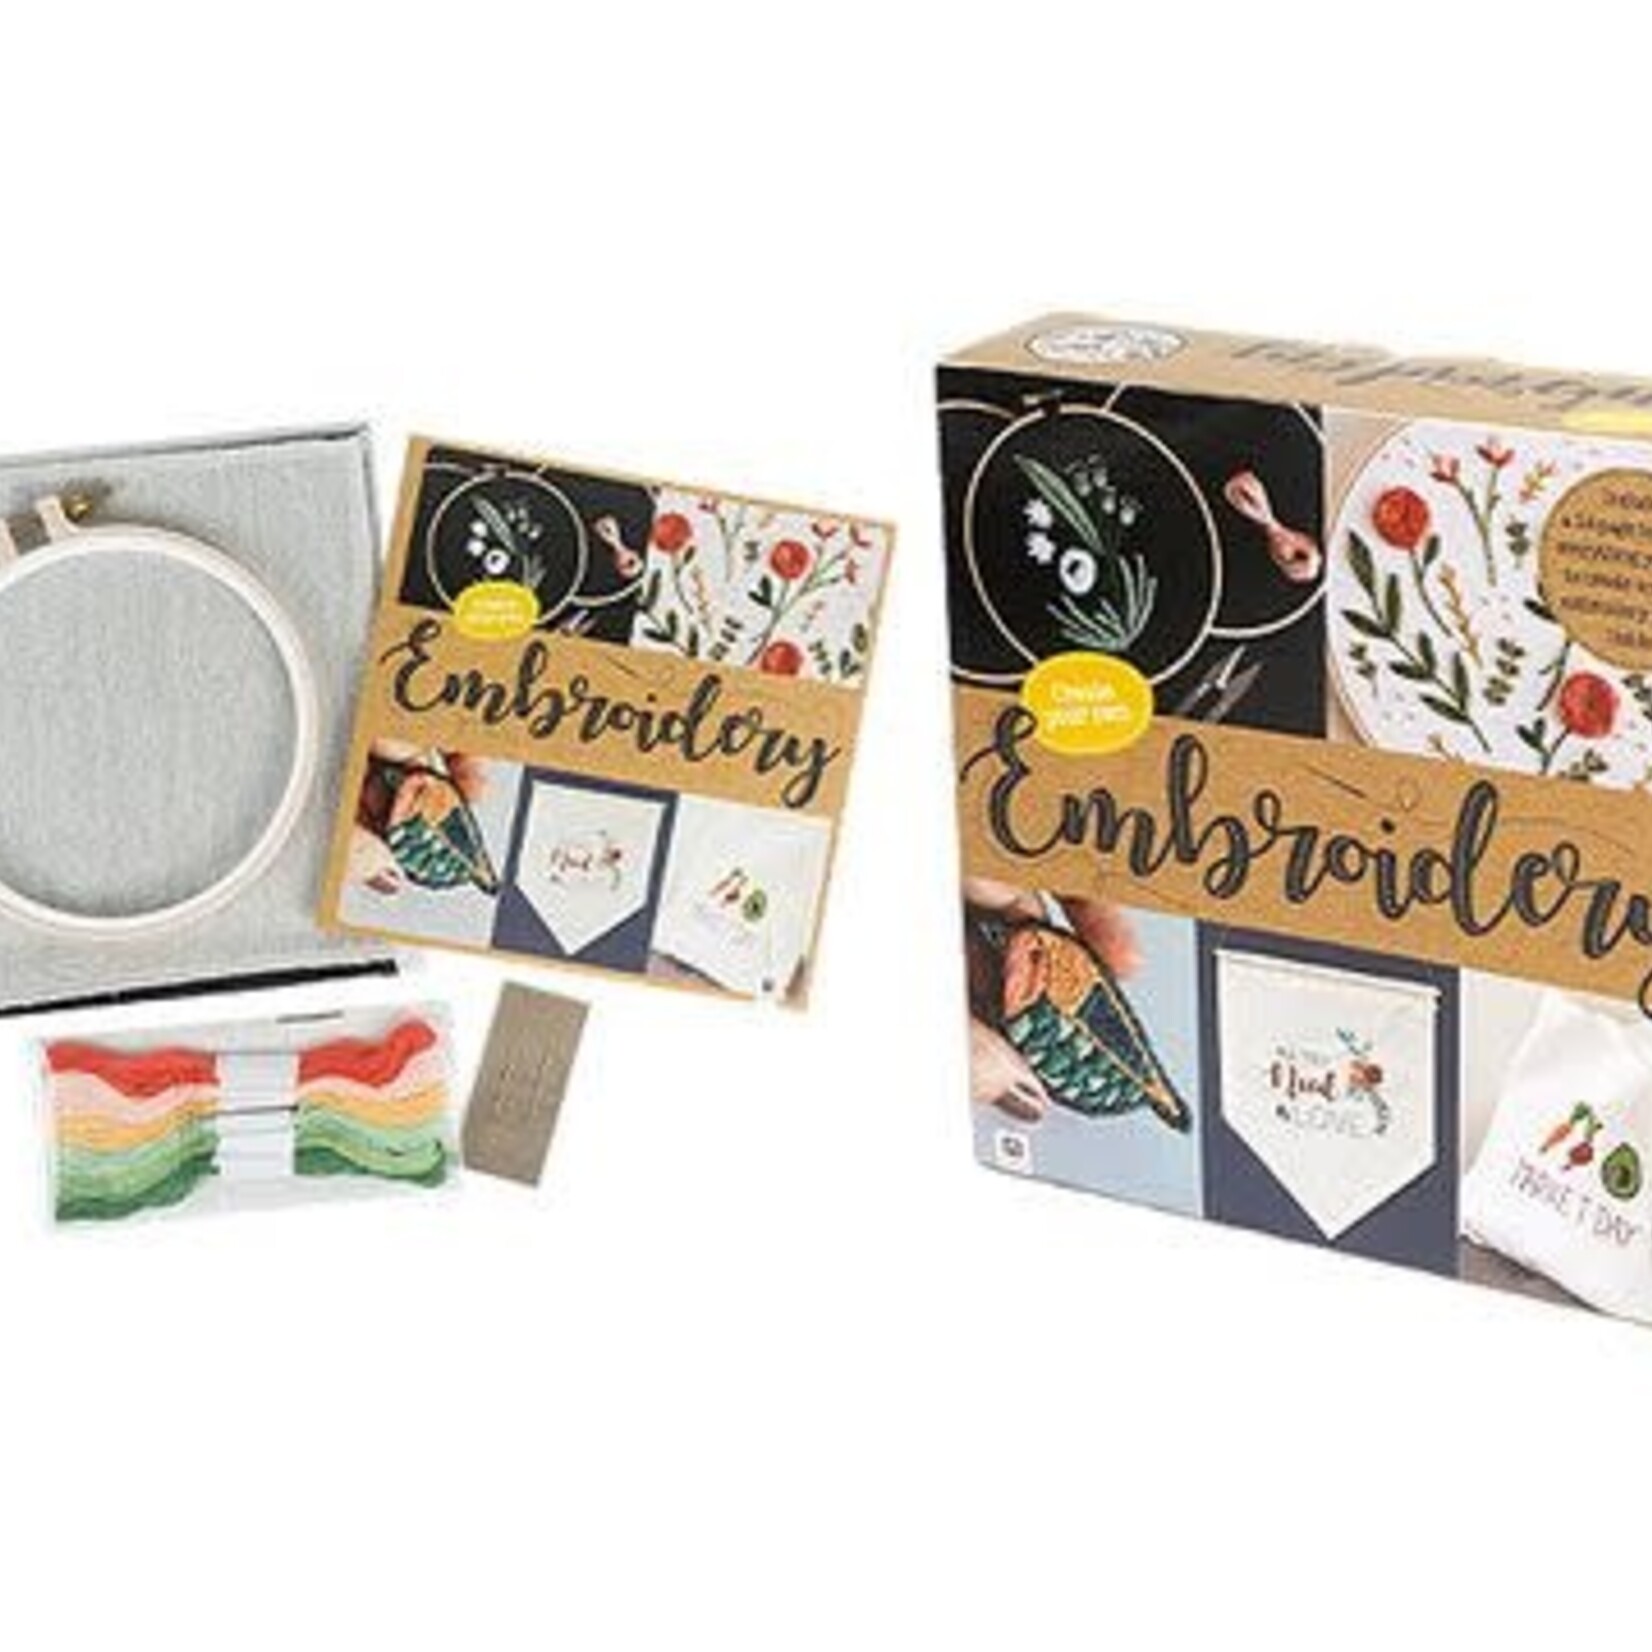 Create Your Own Embriodery Box Set